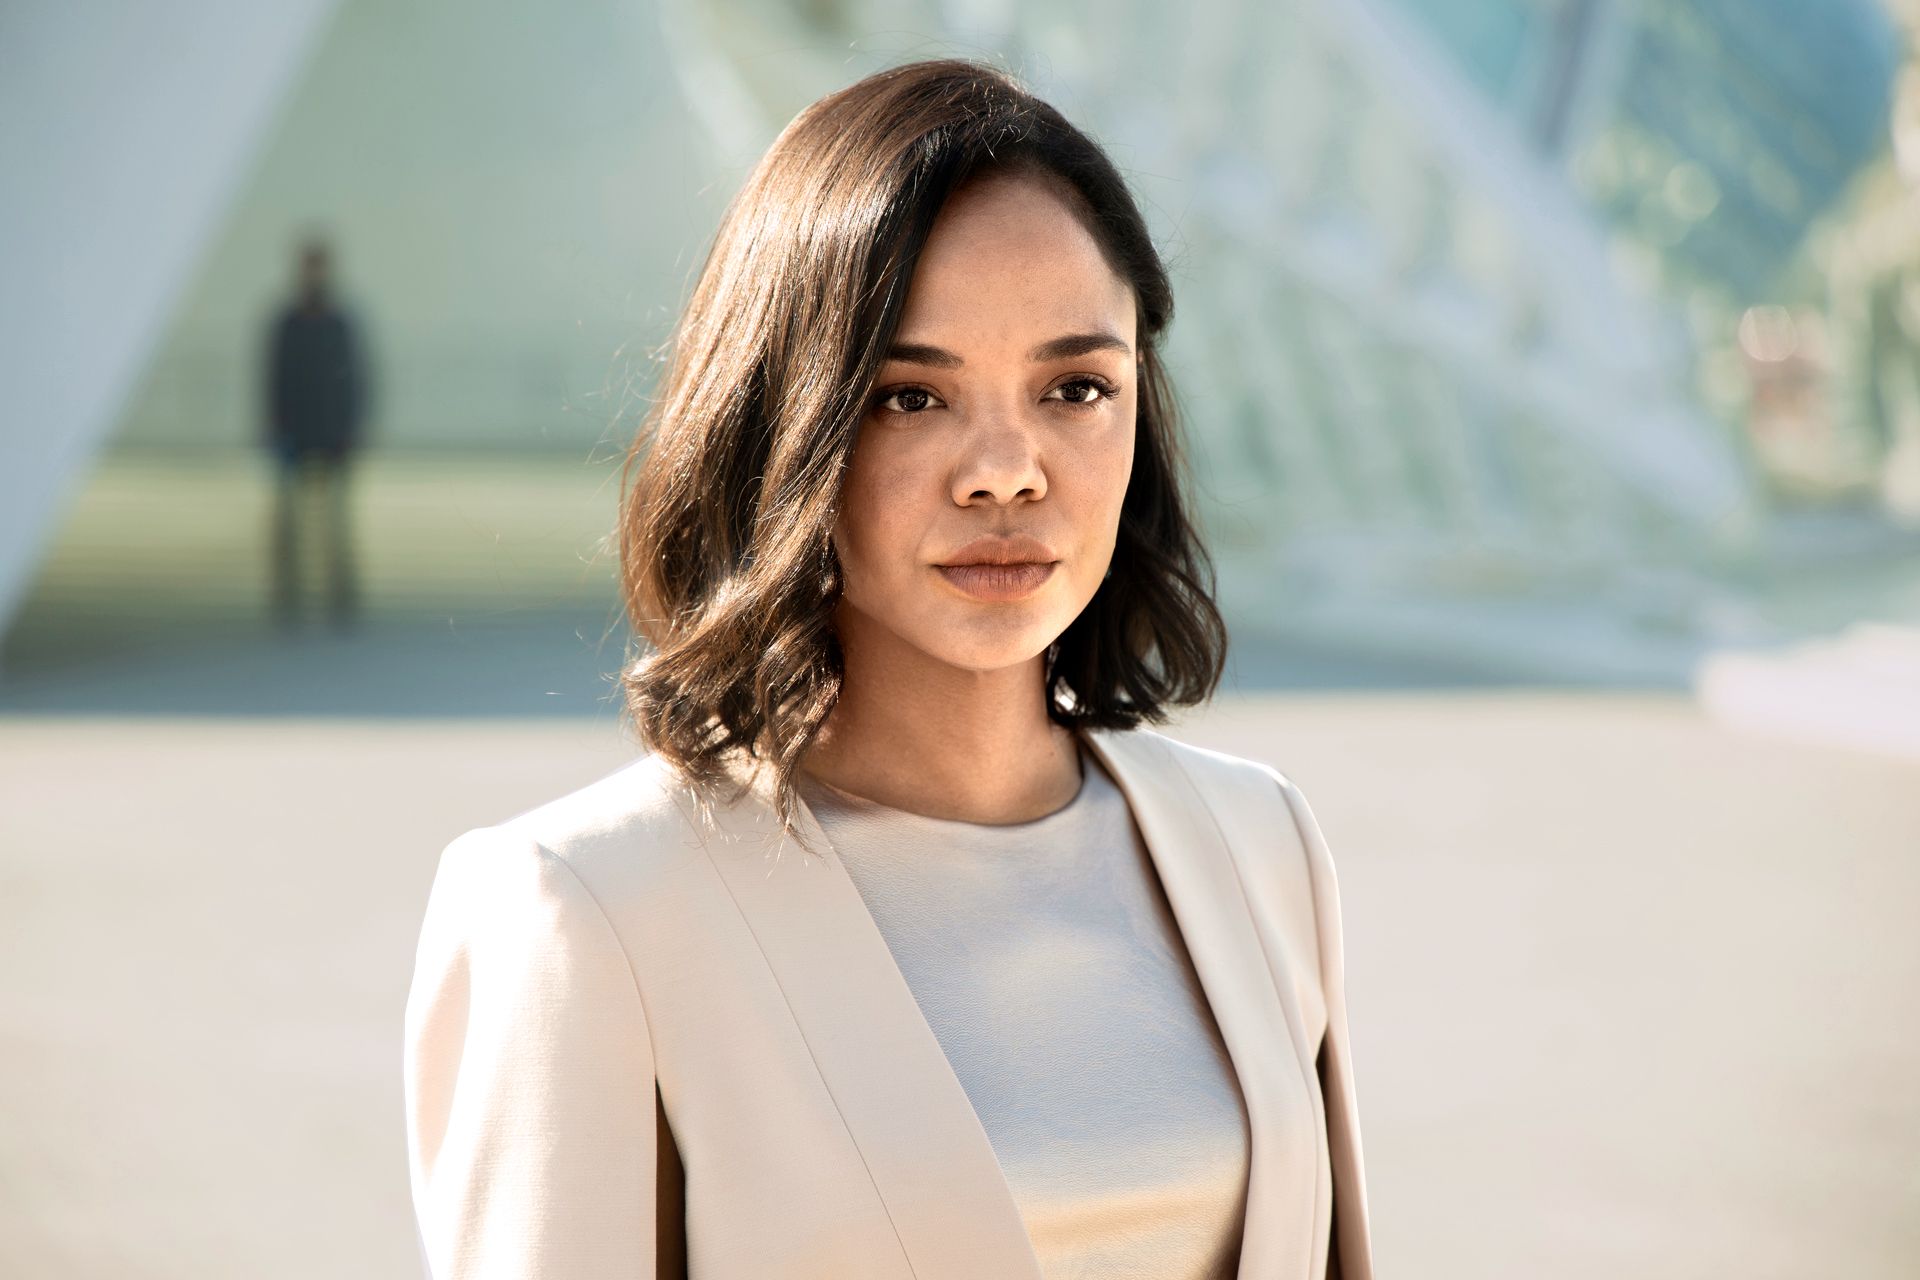 2016 westworld
thompson starred in the hbo drama as the fearsome executive charlotte hale